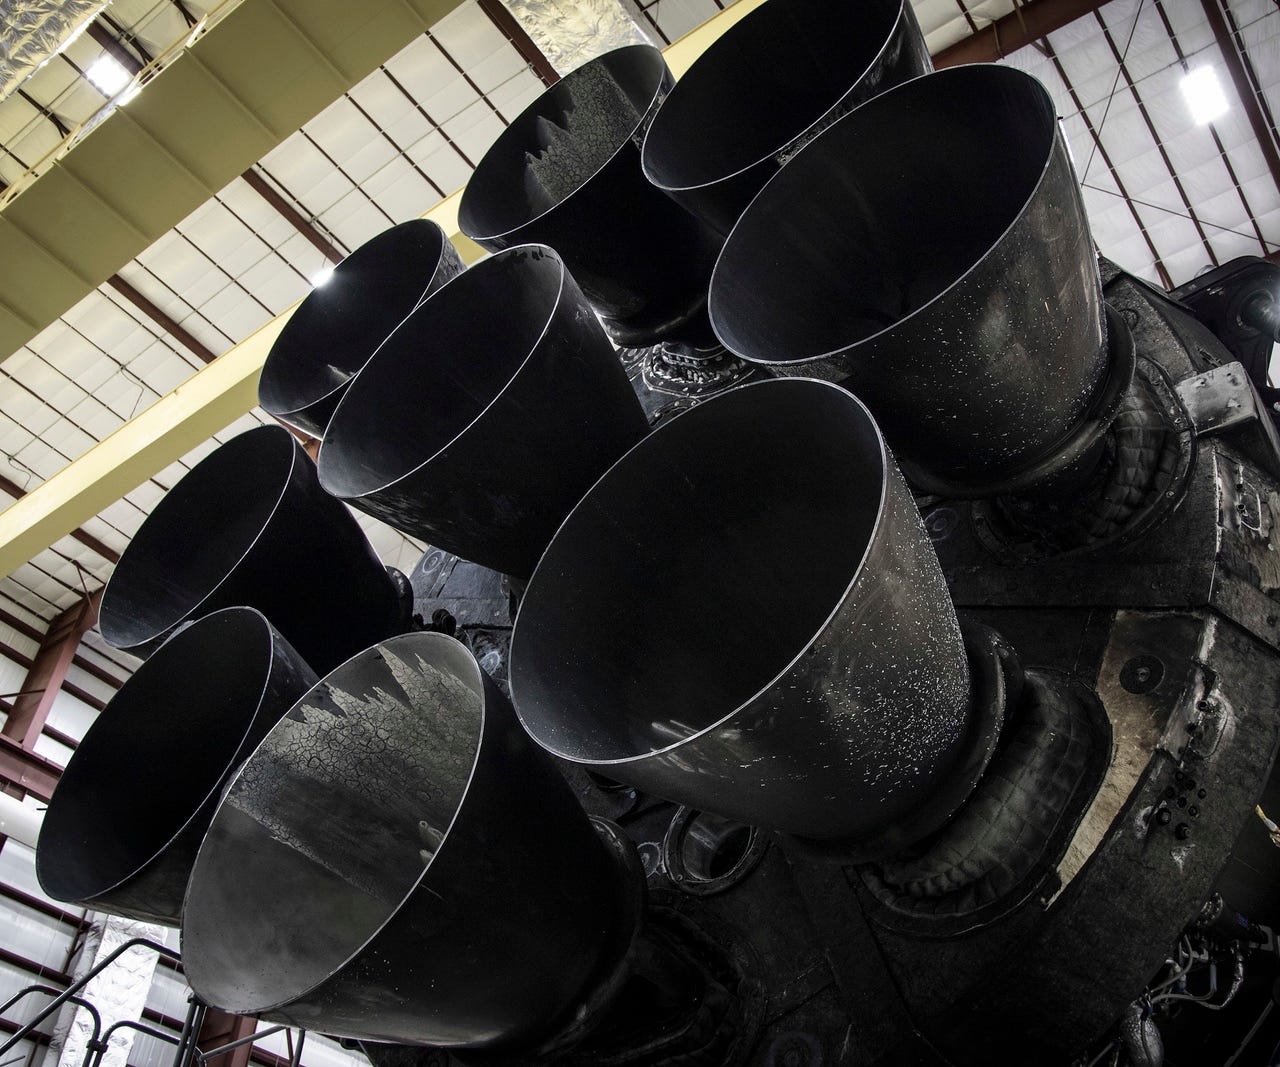 Nine Merlin engines on a landed Falcon 9 booster. Official SpaceX photo.